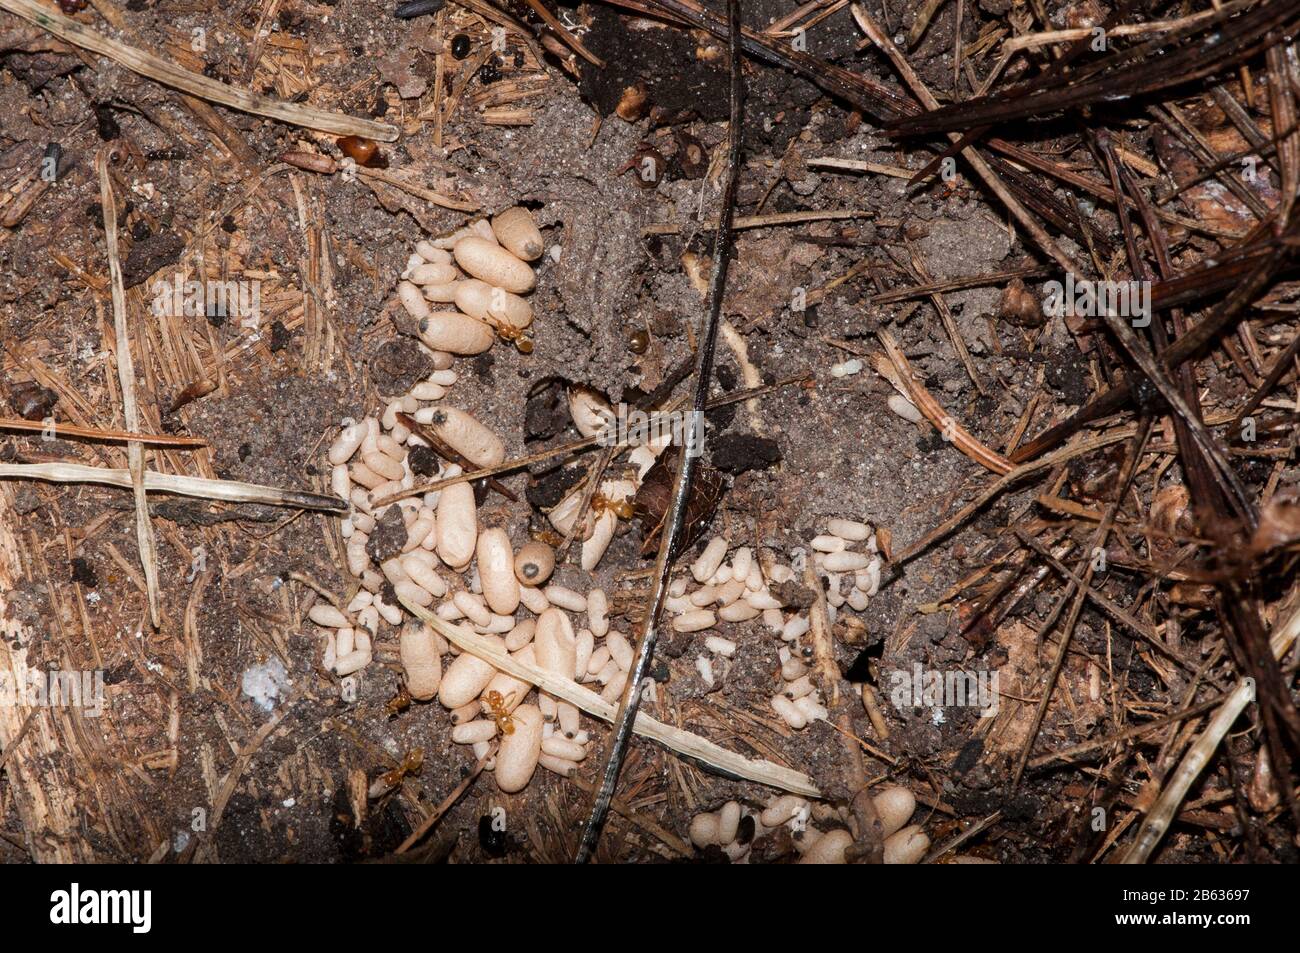 Vadnais Heights, Minnesota. John H. Allison forest. Colony of red ants with cocoon larvae, pupae. Large cocoons will become queen ants and the small c Stock Photo